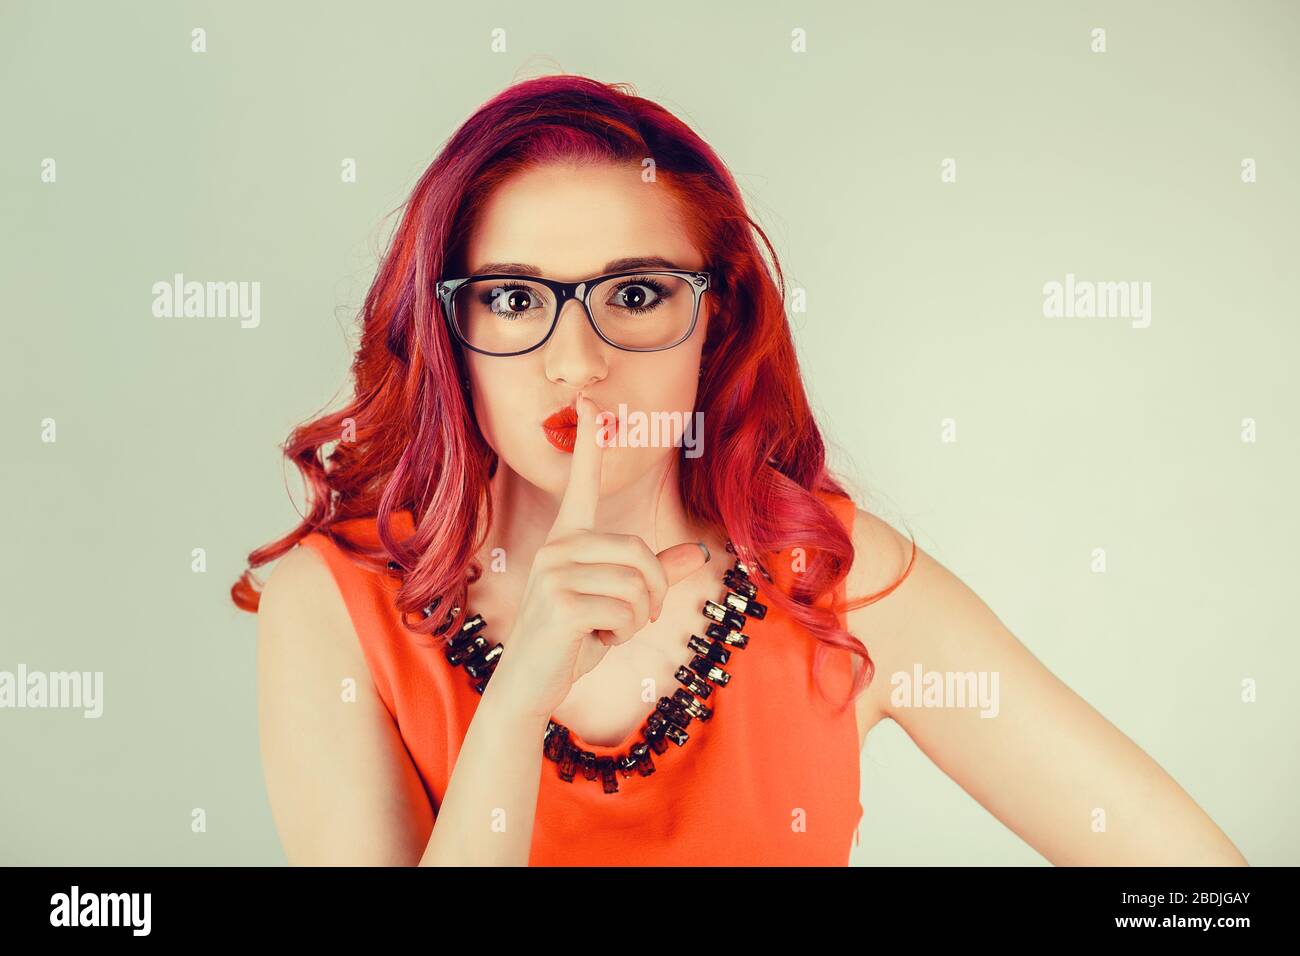 Woman wide eyed asking for silence or secrecy with finger on lips hush hand gesture green background wall. Pretty girl placing fingers on lips, shhh s Stock Photo